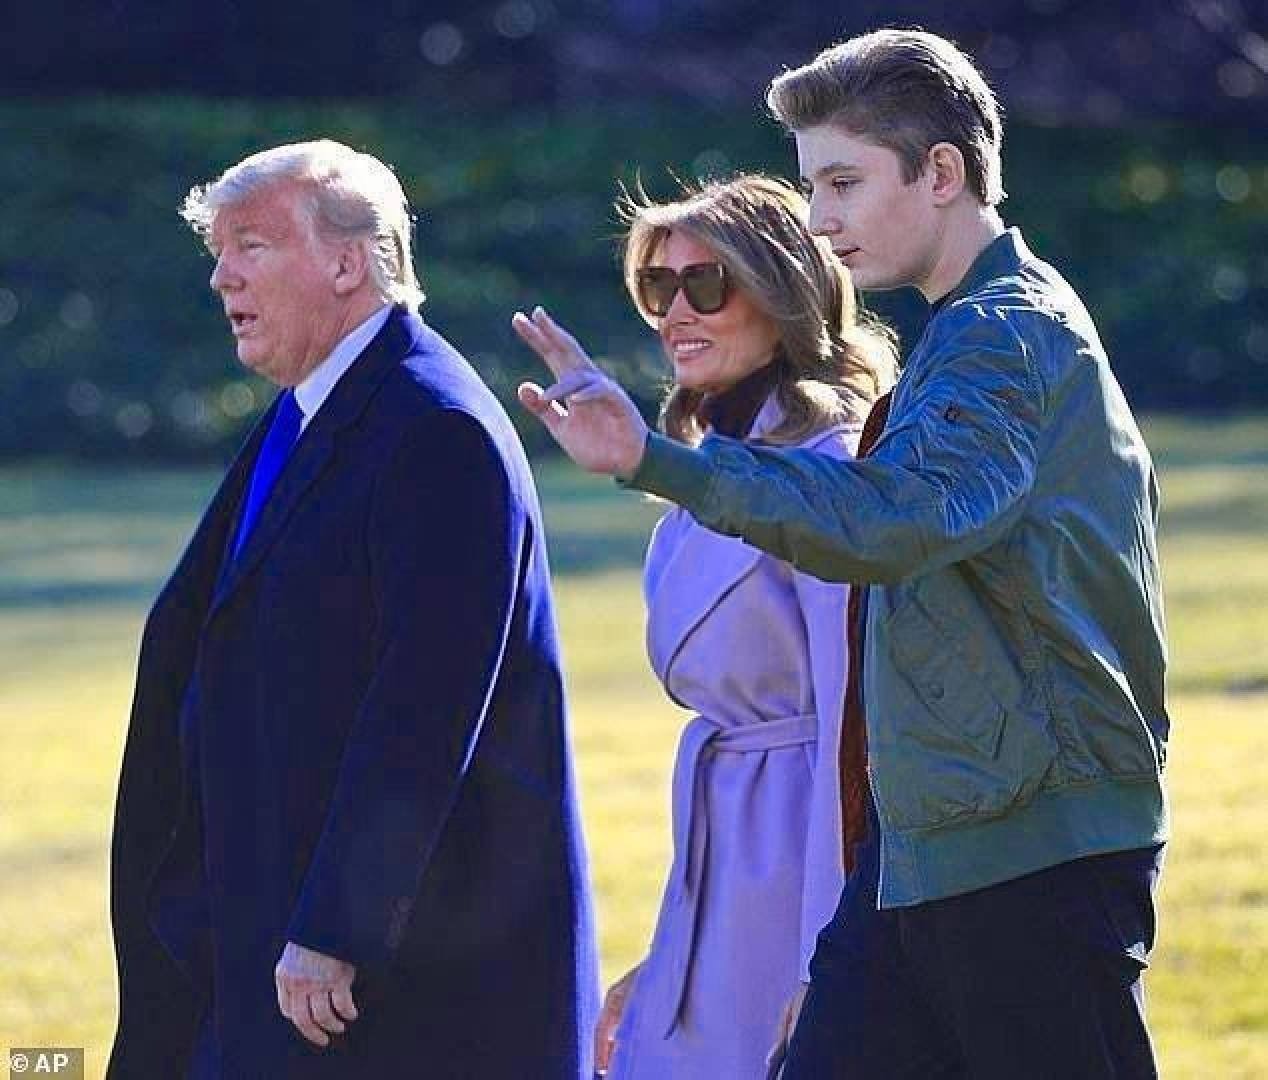 The untold truth: 5 times Barron Trump proved he’s too cool for his dad Donald